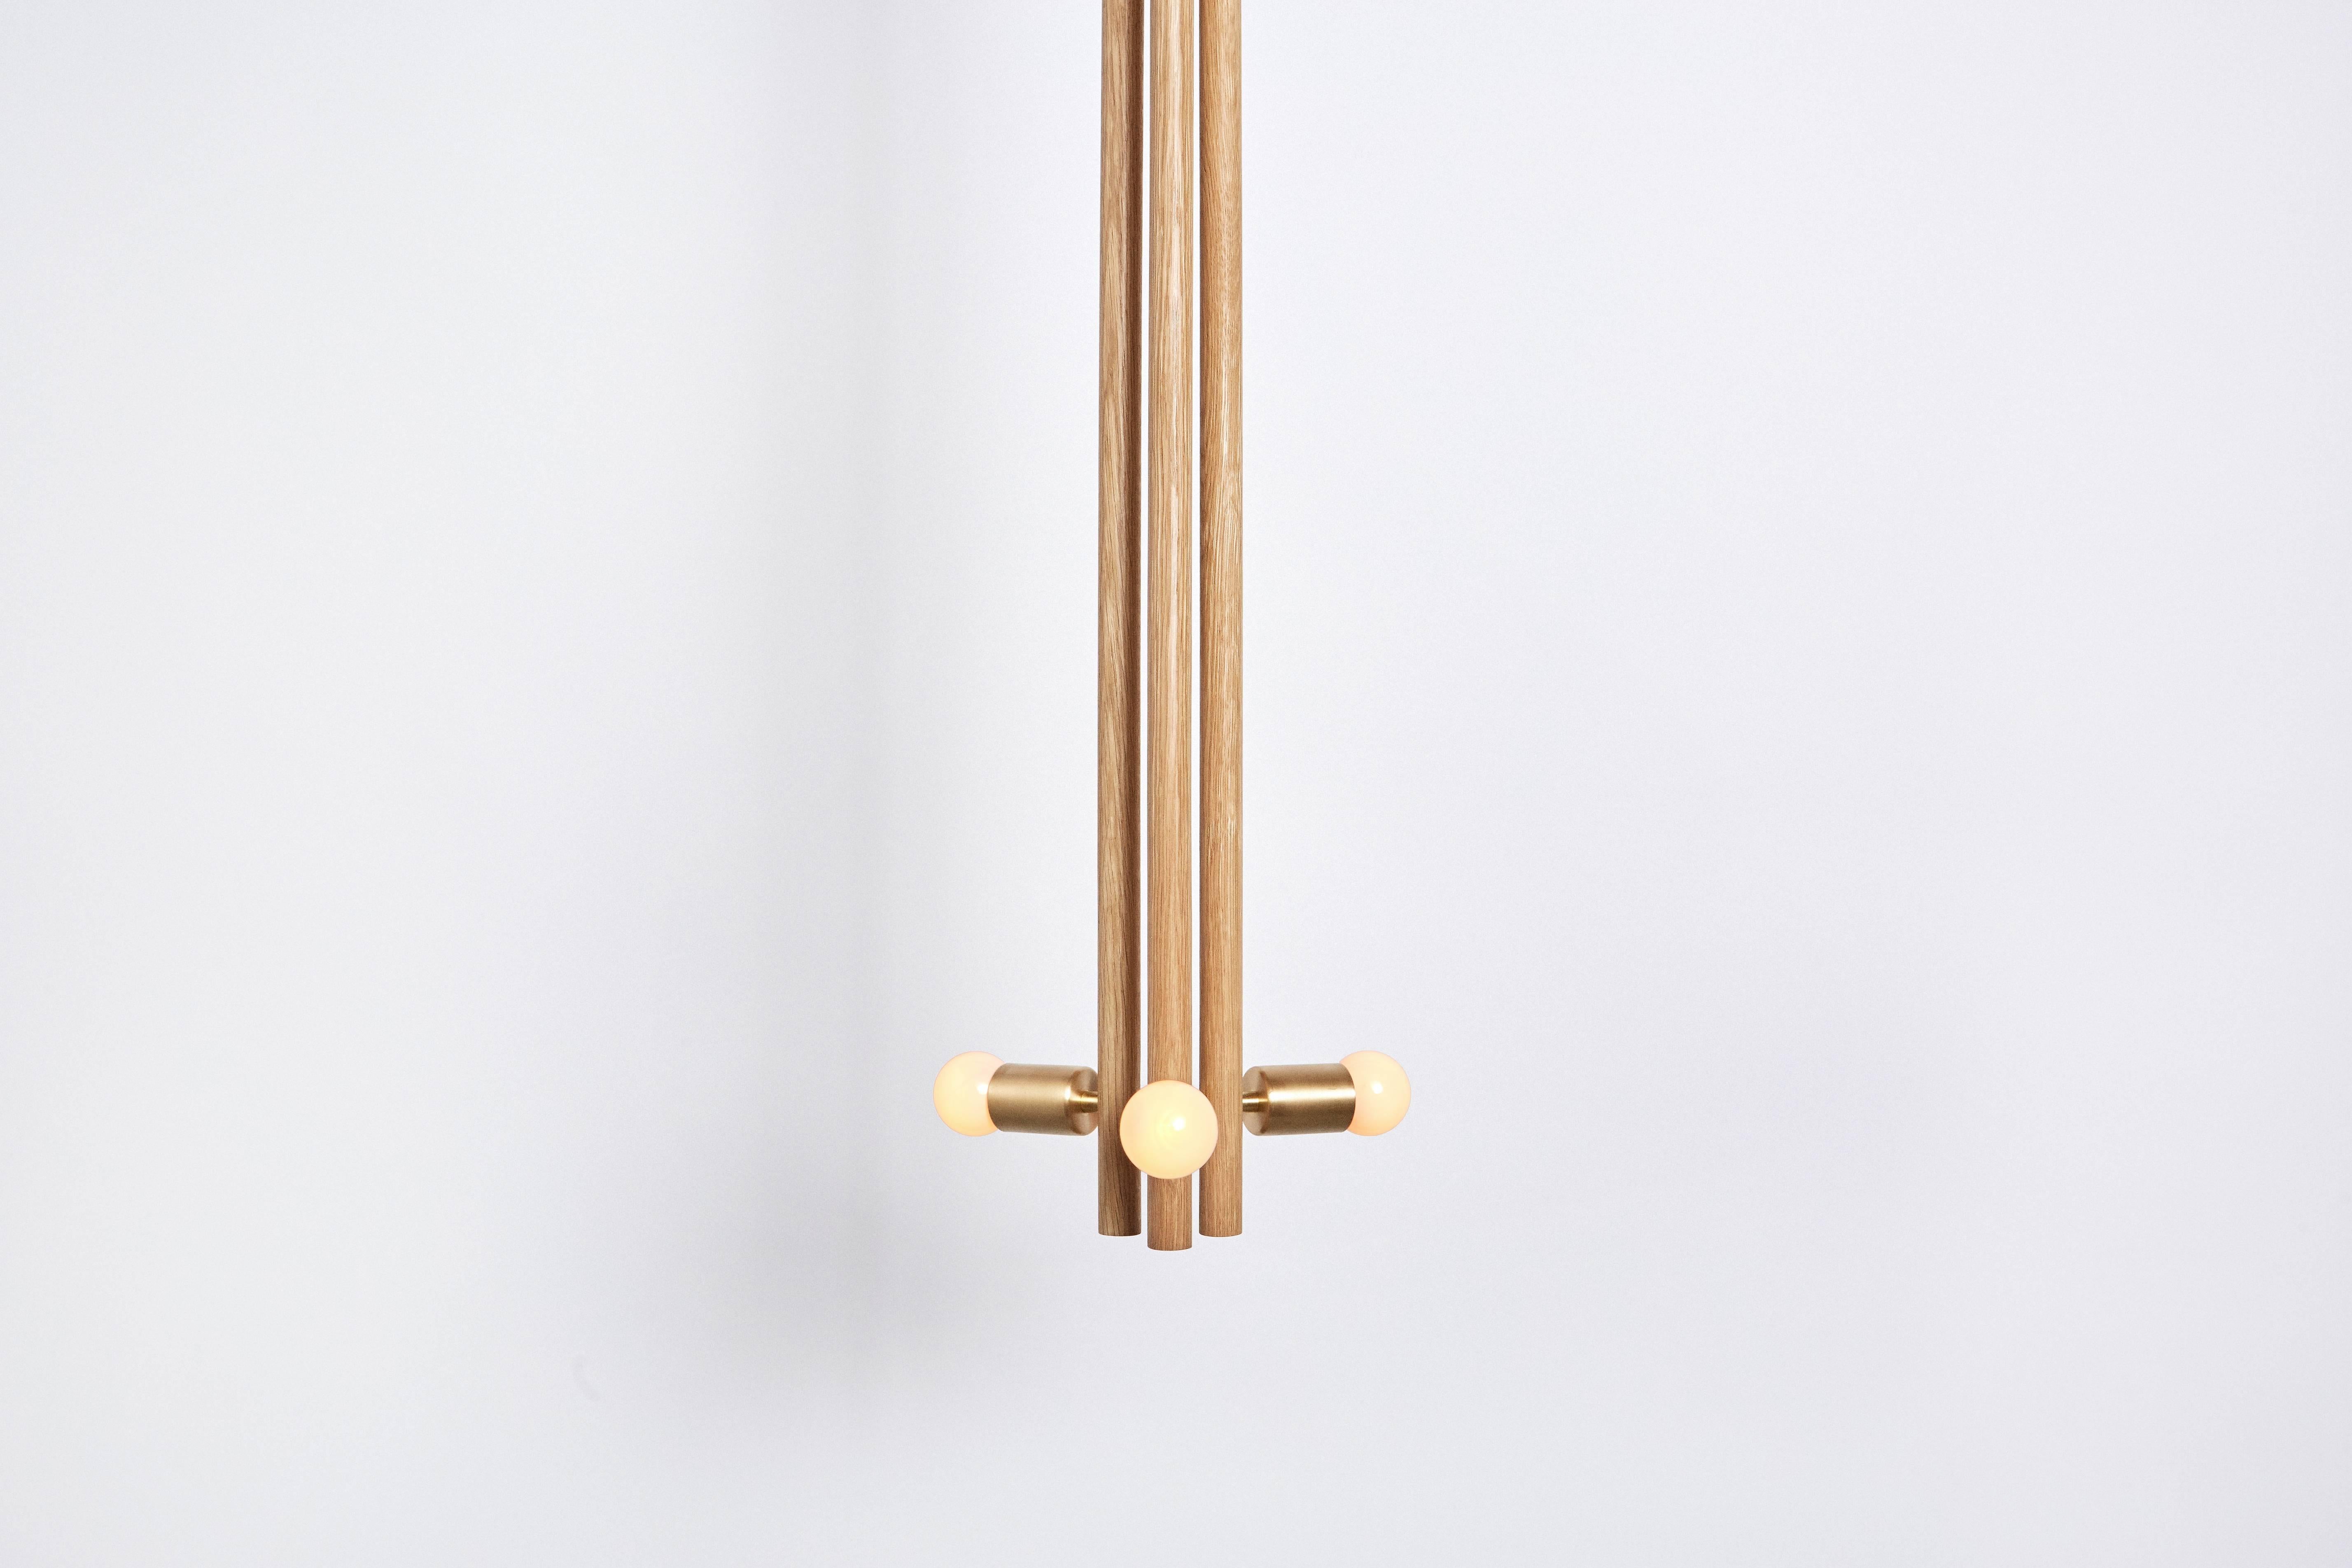 The Lodge pendant is a singular wooden column, composed of three turned wooden forms. Held together by a network of metal tubing, with a milled metal ball connection, the bulbs radiate about the column. 

Available in natural oak/hewn brass and